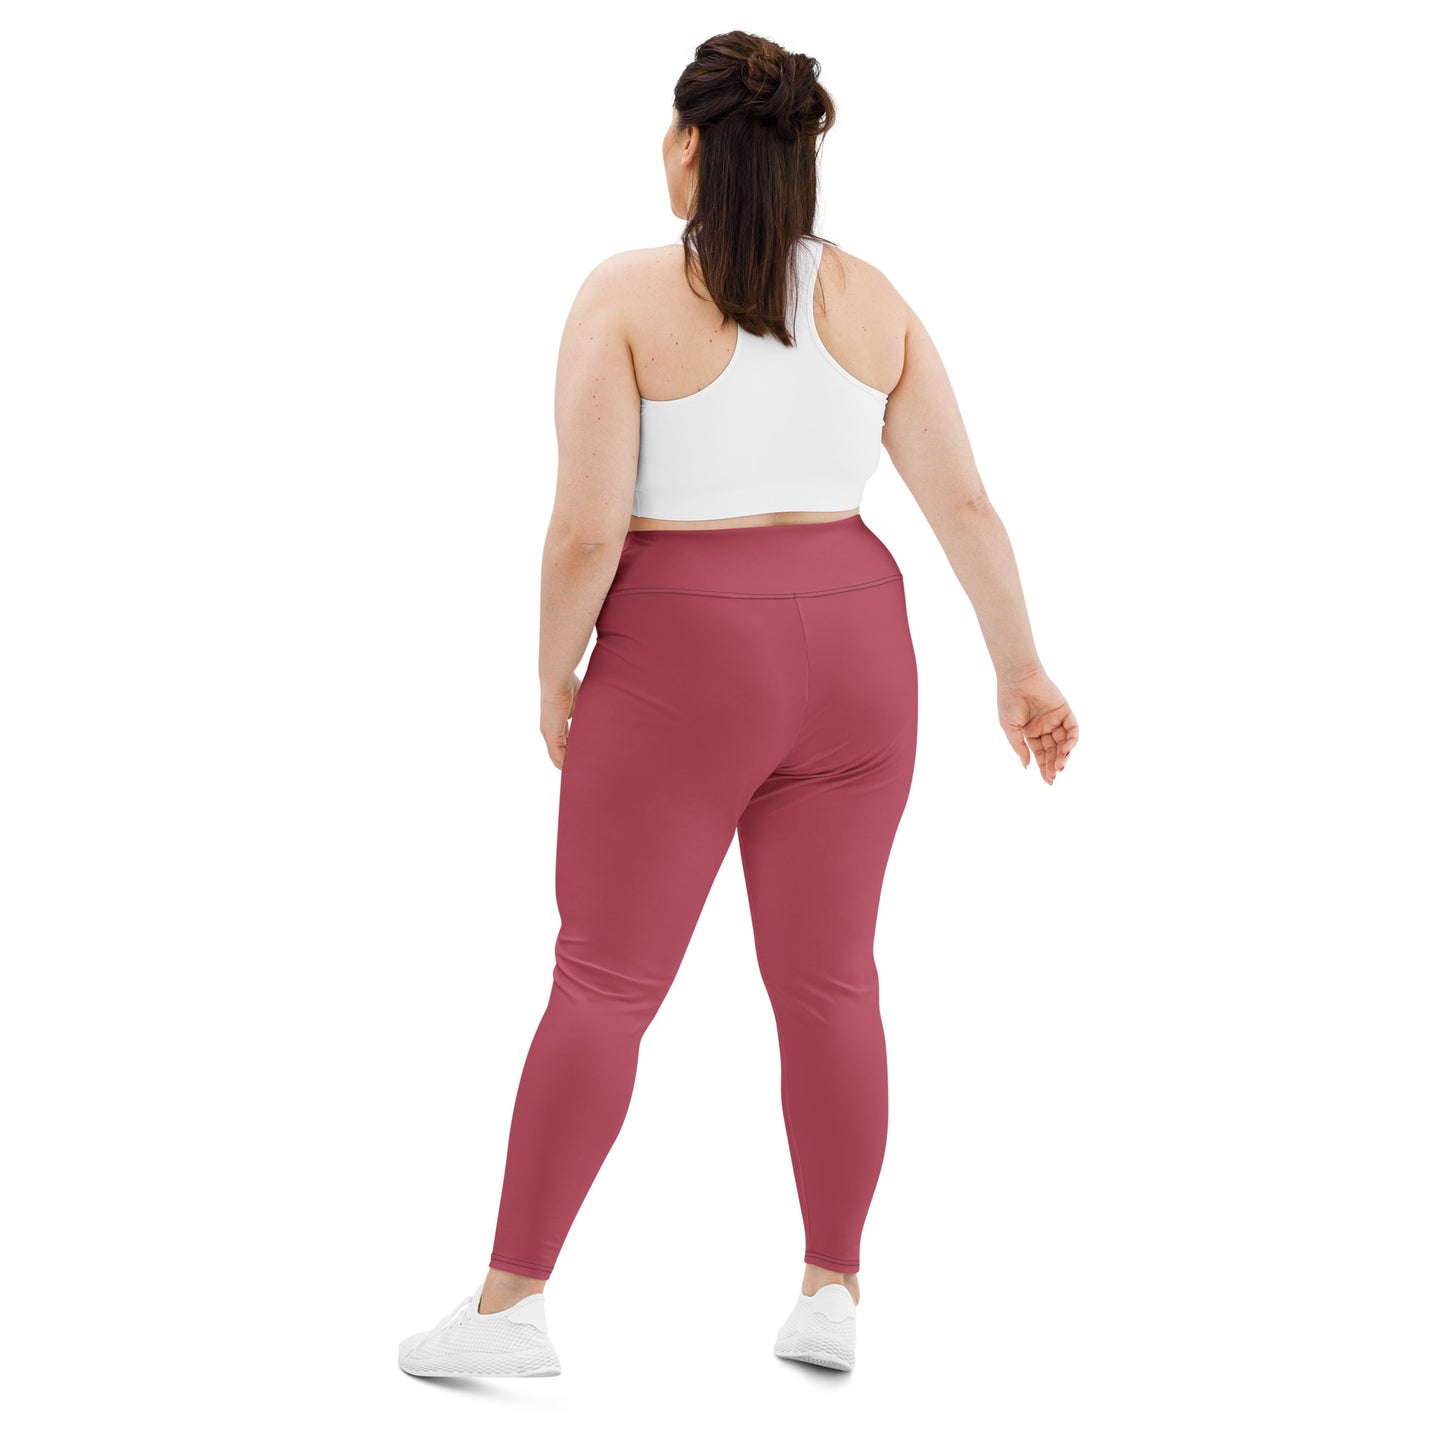 All-Over Print Plus Size Leggings - Hippie Pink